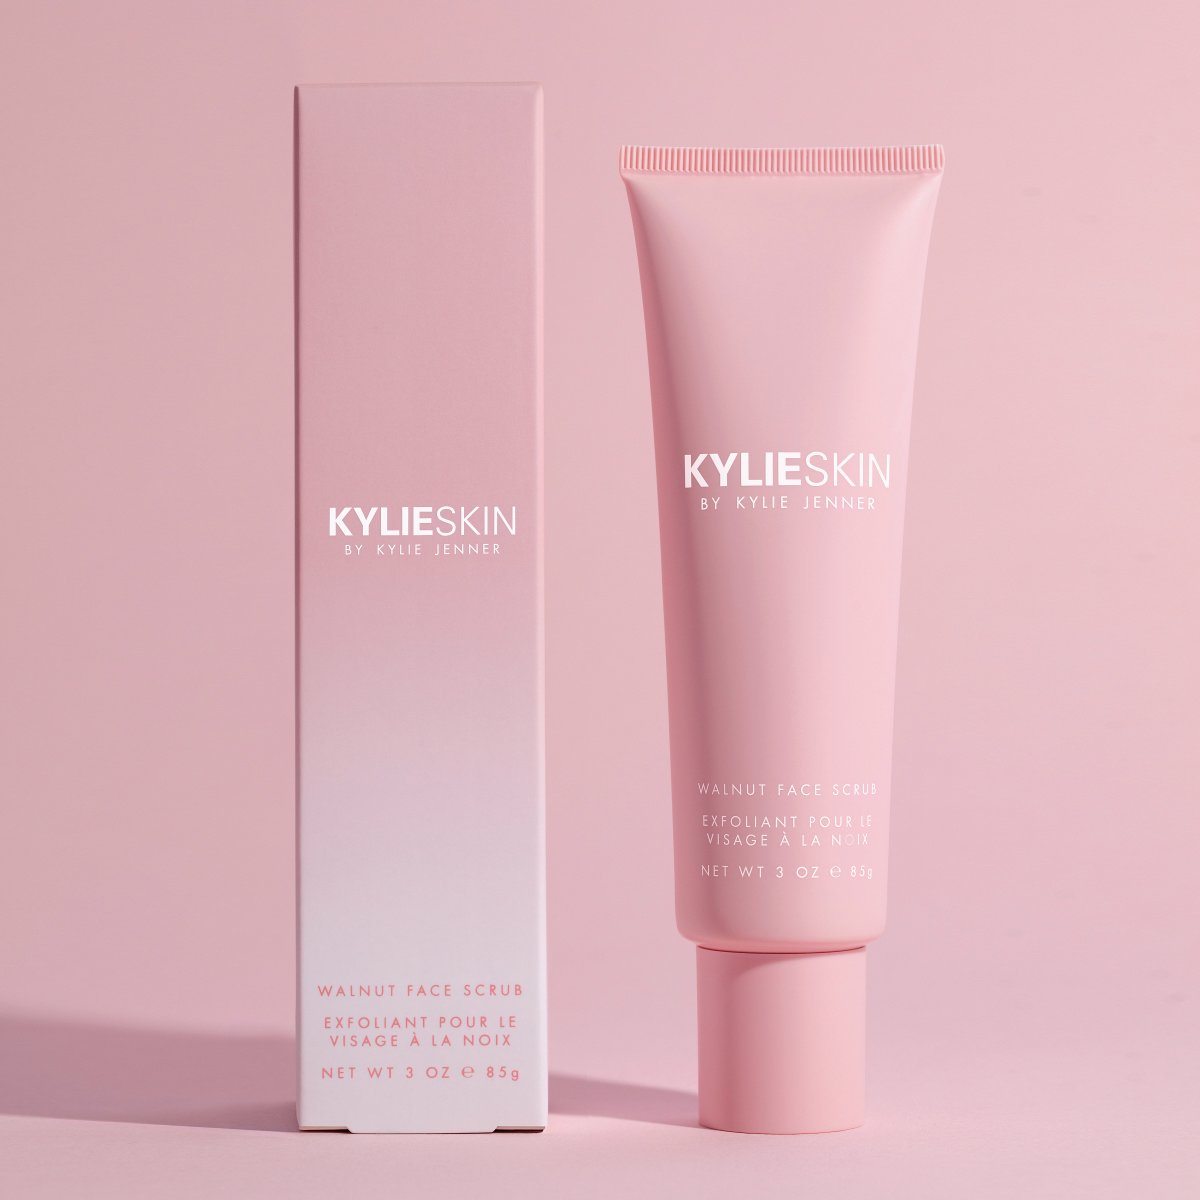 Kylie Skin Walnut Face Scrub package and product